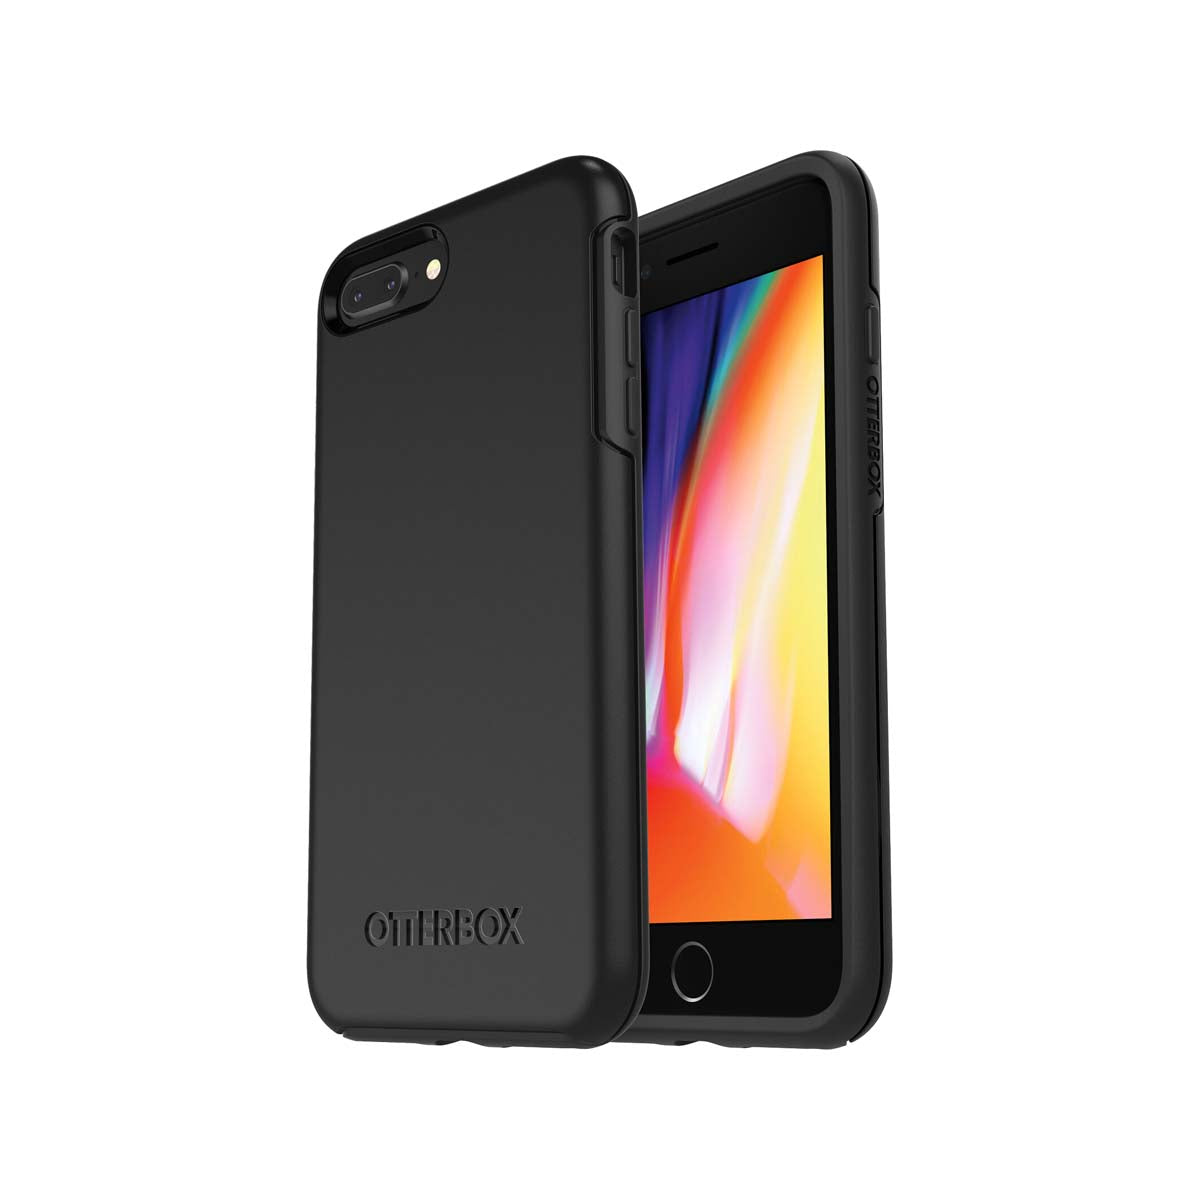 OtterBox Symmetry Phone Case for iPhone 7/8 Plus.